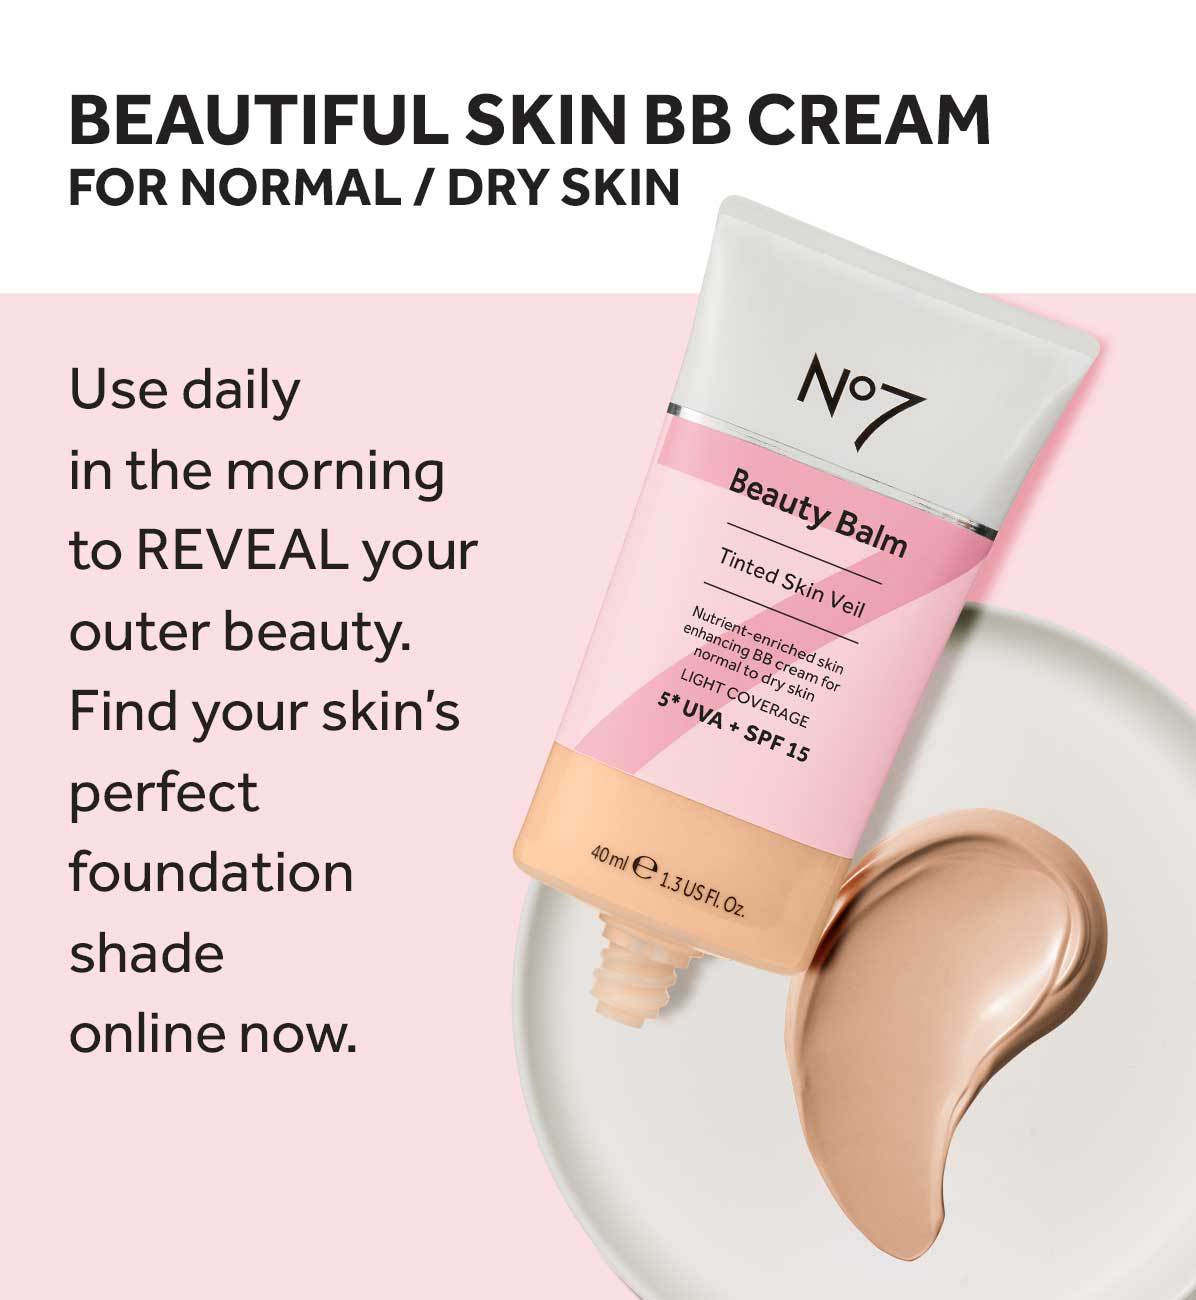 BEAUTIFUL SKIN BB CREAMFOR NORMAL/ DRY SKINUse dailyin the morningto REVEAL yourouter beauty.Find your skin'sperfectfoundationshadeonline now.